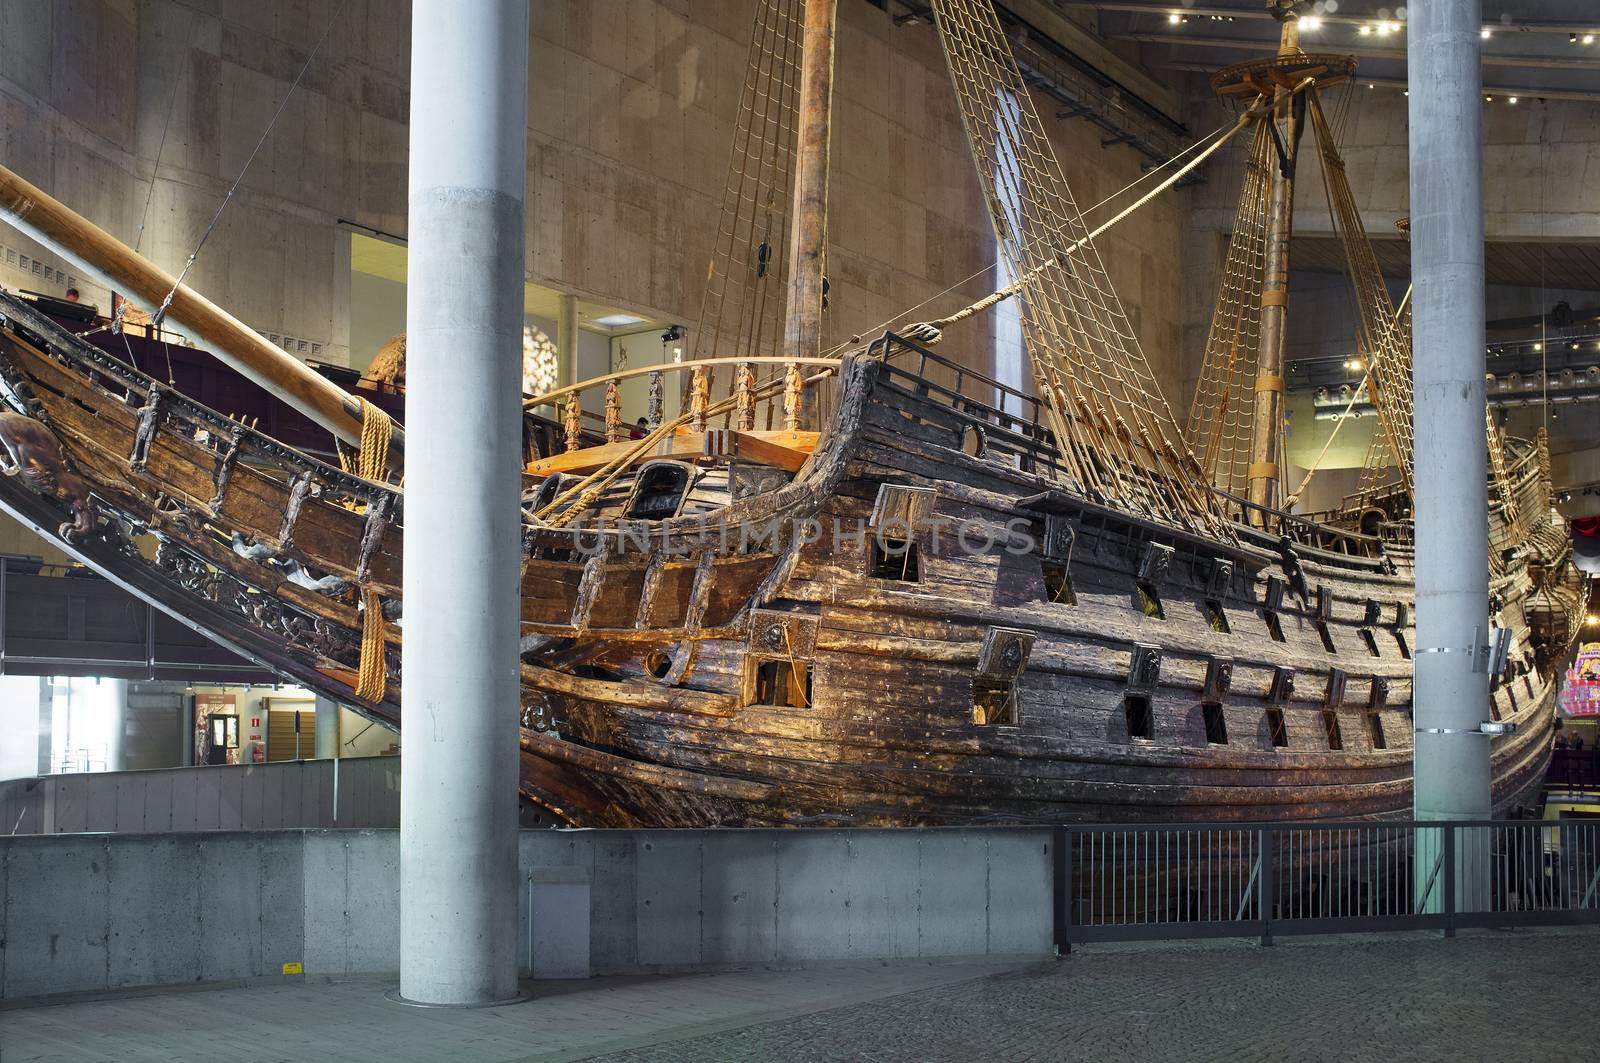 STOCKHOLM, SWEDEN – MAY 17, 2014: The Vasa Museum displays the only almost fully intact 17th century ship that has ever been salvaged, the 64-gun warship Vasa that sank on her maiden voyage in 1628.